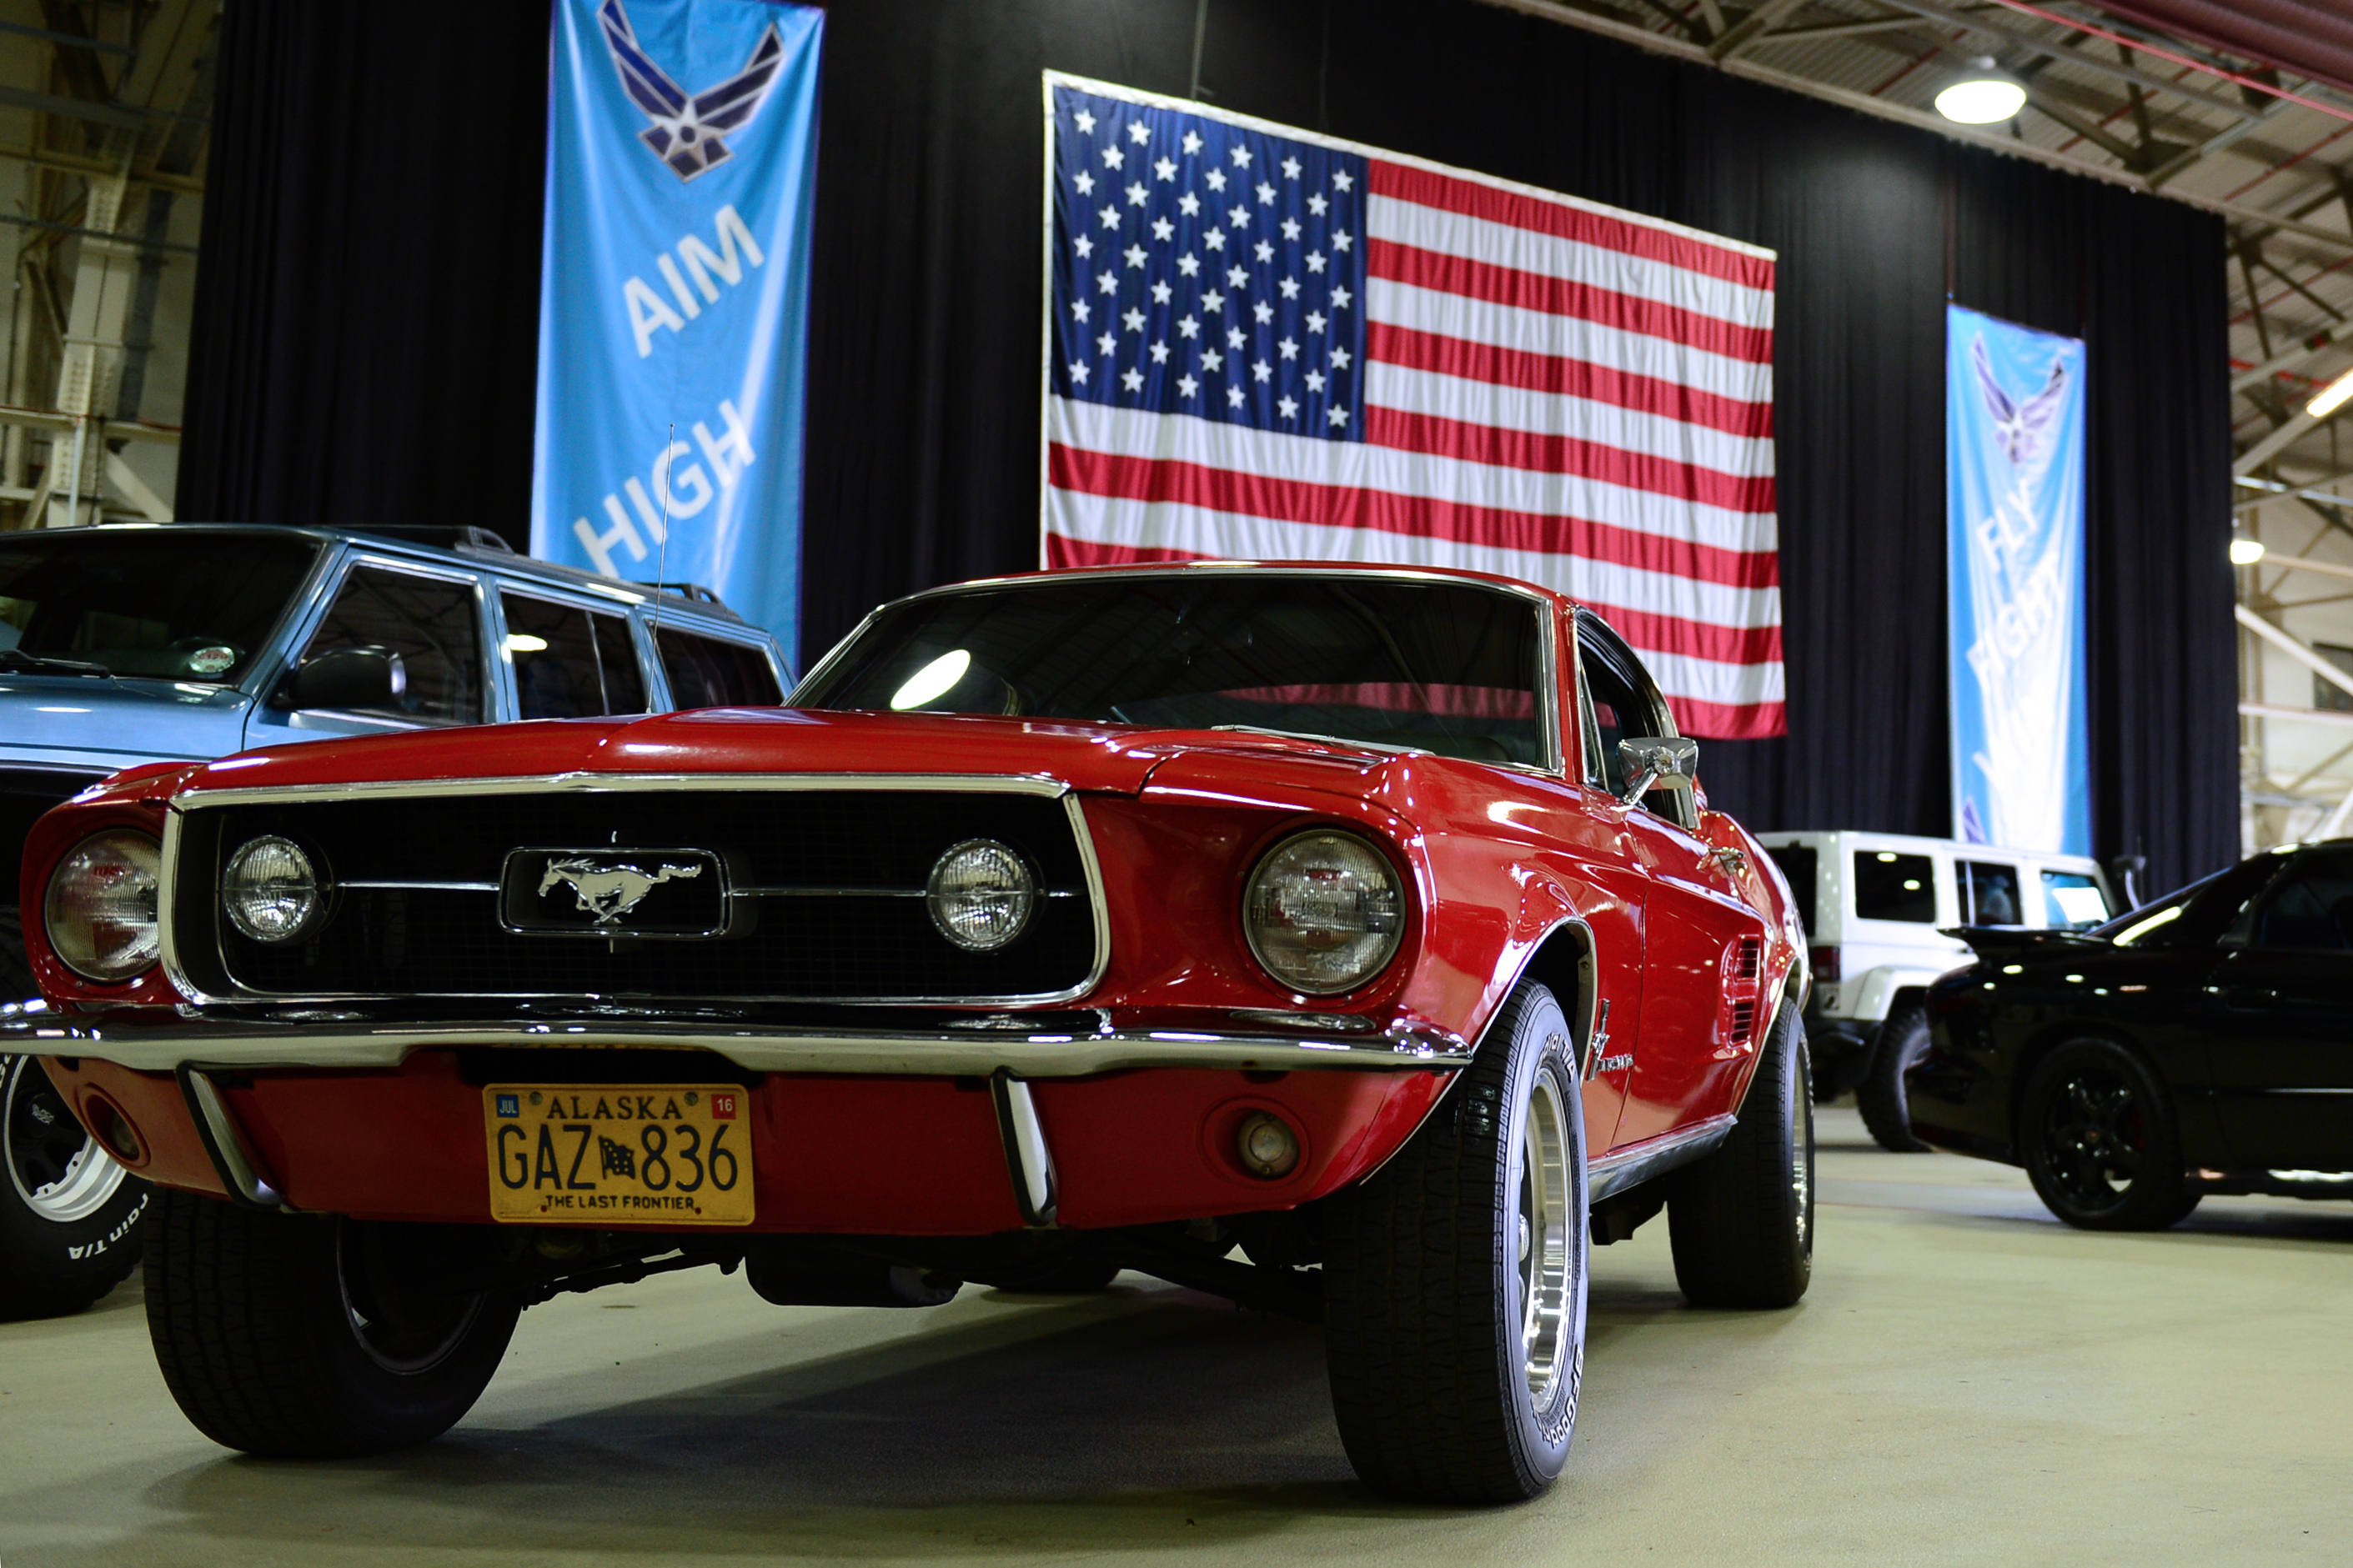 A 1967 Ford Mustang GT 390 big-block